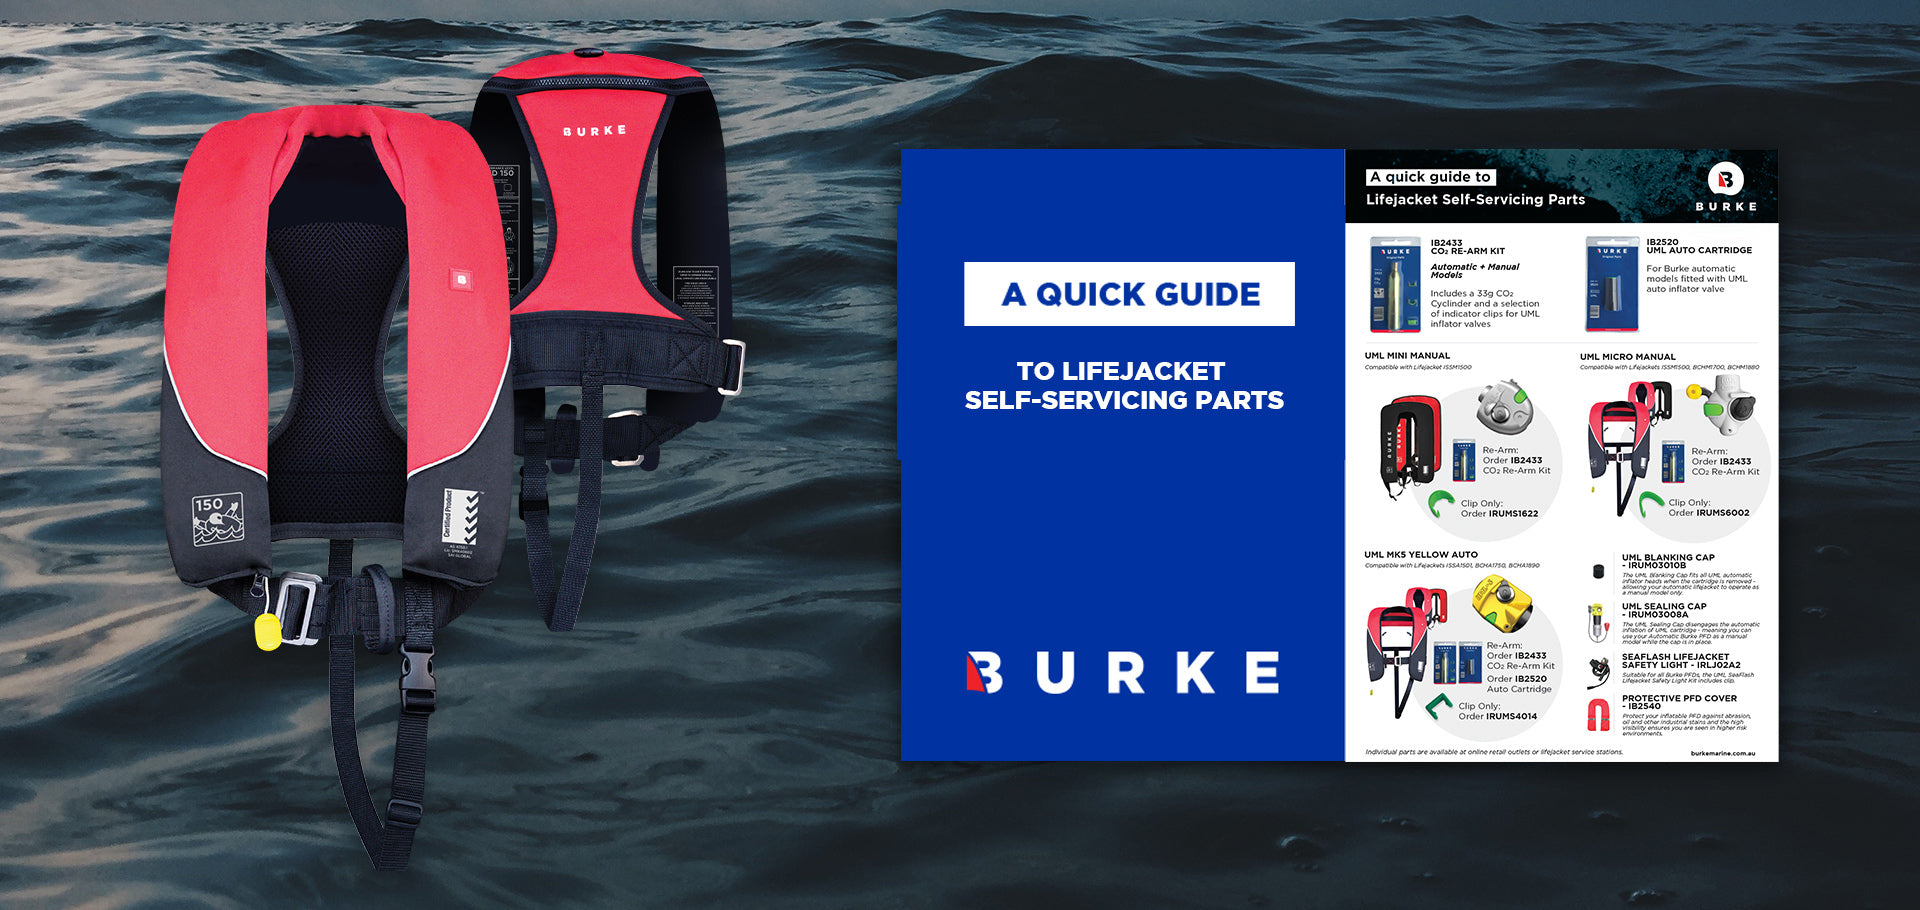 Which Lifejacket Auto-Inflator Should We Select? - Attainable